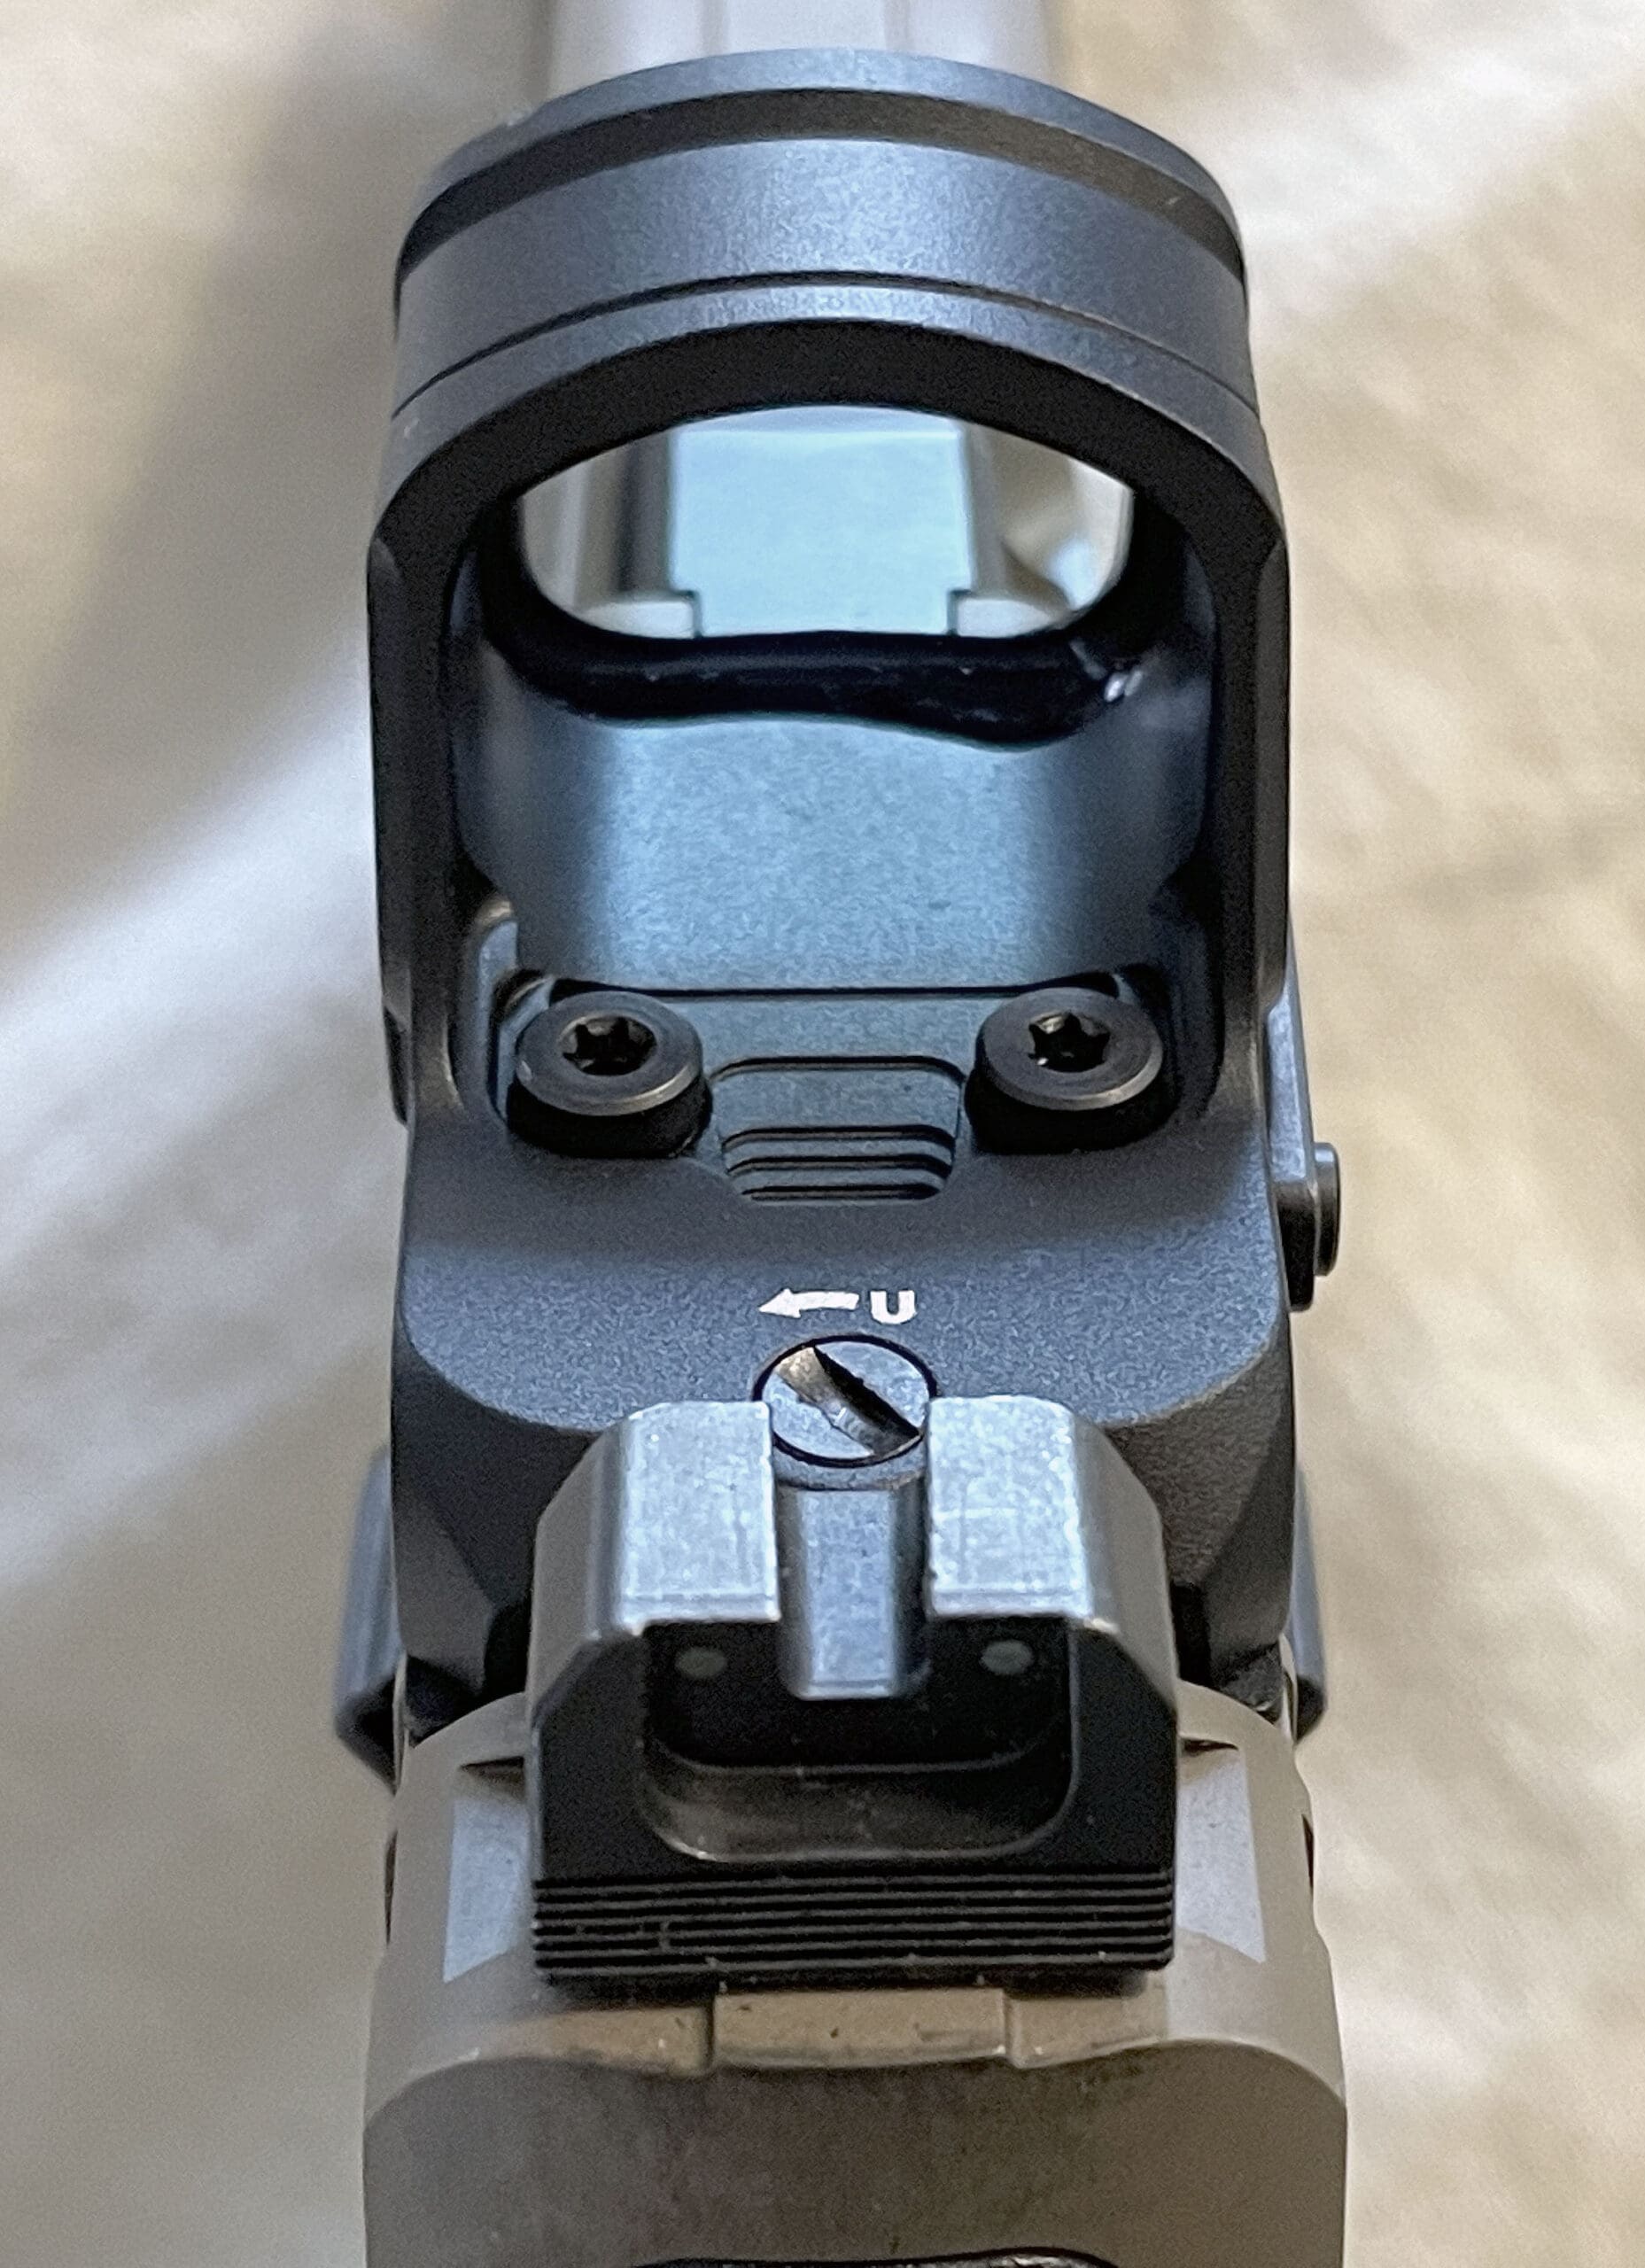 Primary Arms SLx RS-10 red dot sight